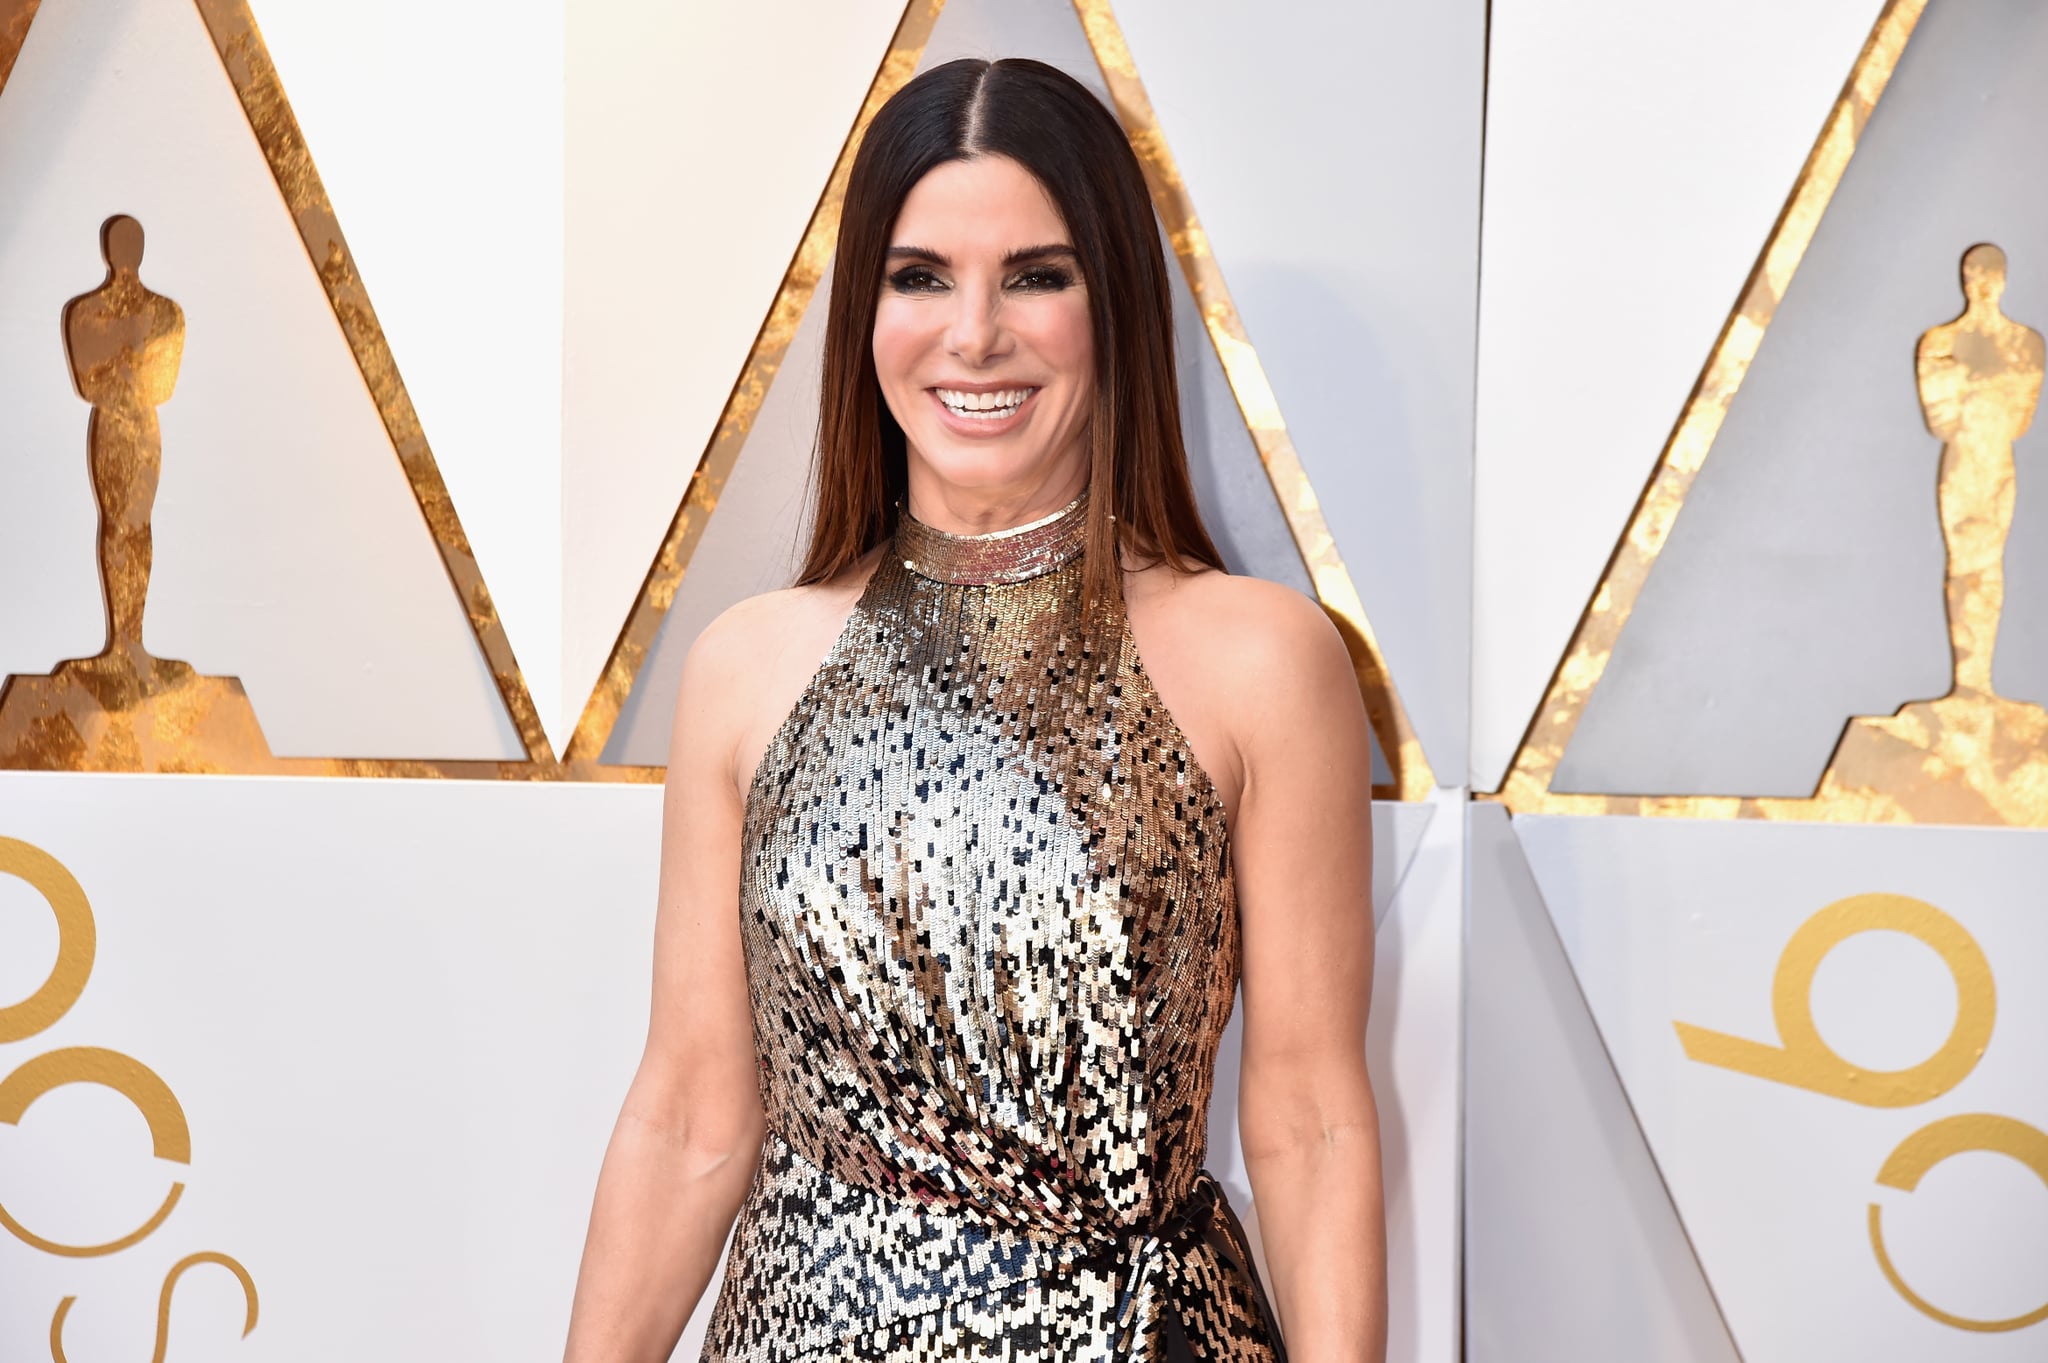 HOLLYWOOD, CA - MARCH 04:  Sandra Bullock attends the 90th Annual Academy Awards at Hollywood & Highland centre on March 4, 2018 in Hollywood, California.  (Photo by Jeff Kravitz/FilmMagic)